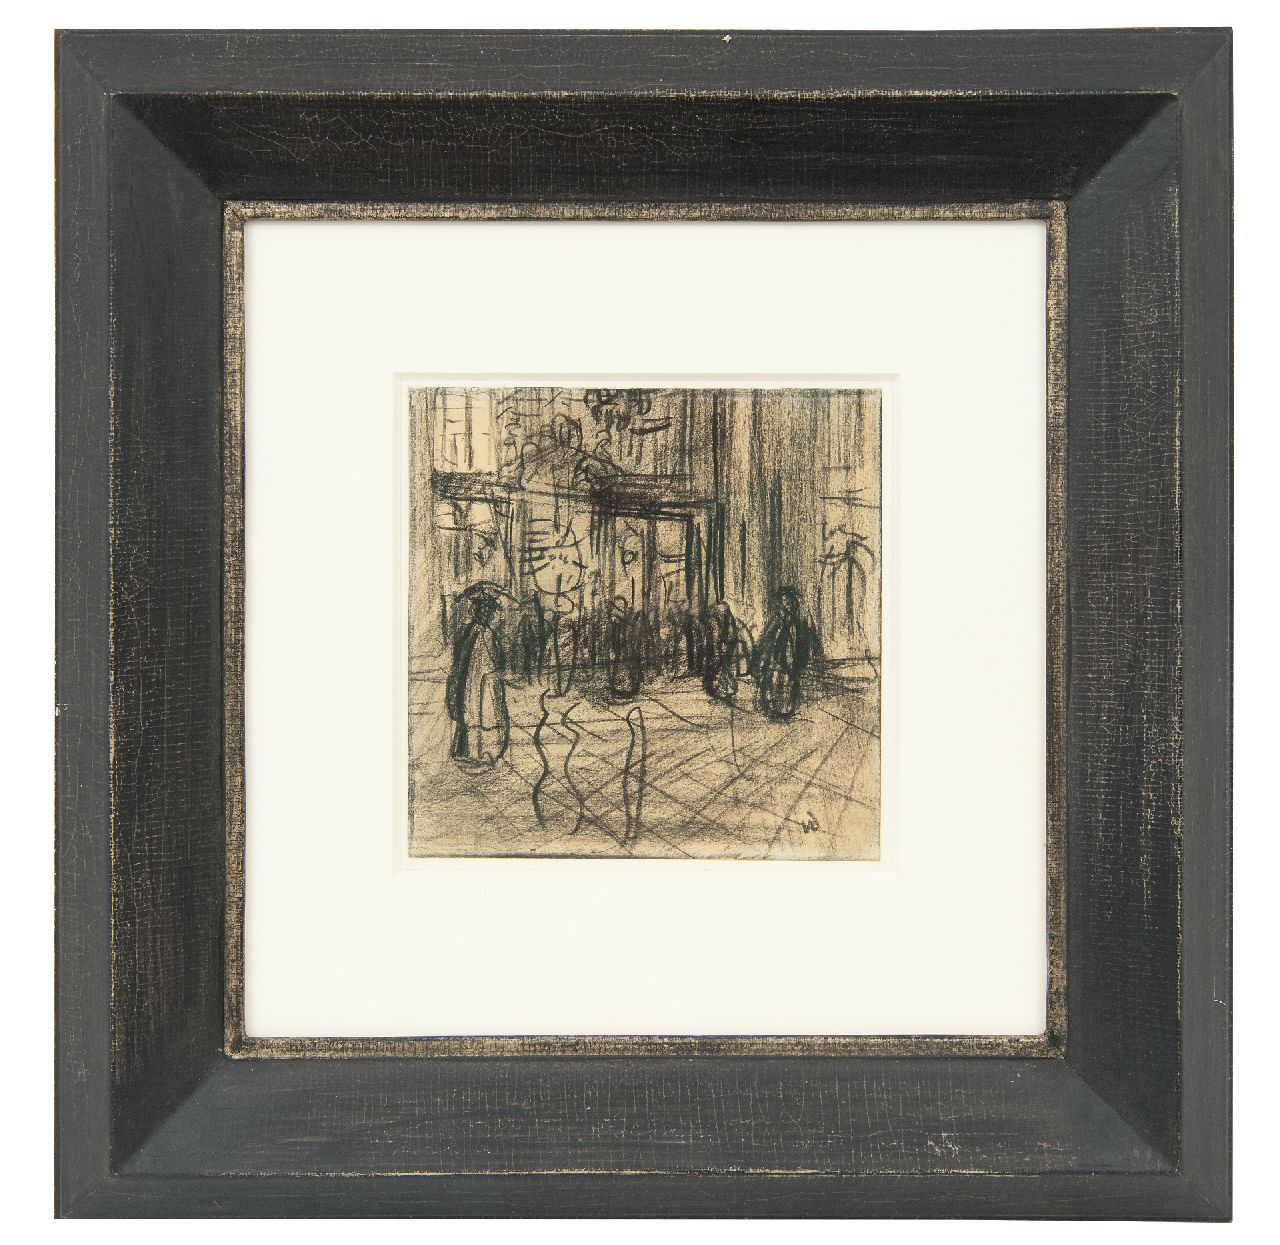 Dongen C.T.M. van | Cornelis Theodorus Maria 'Kees' van Dongen | Watercolours and drawings offered for sale | Figures in a shopping street, charcoal on paper 12.4 x 12.4 cm, signed l.r. with initials